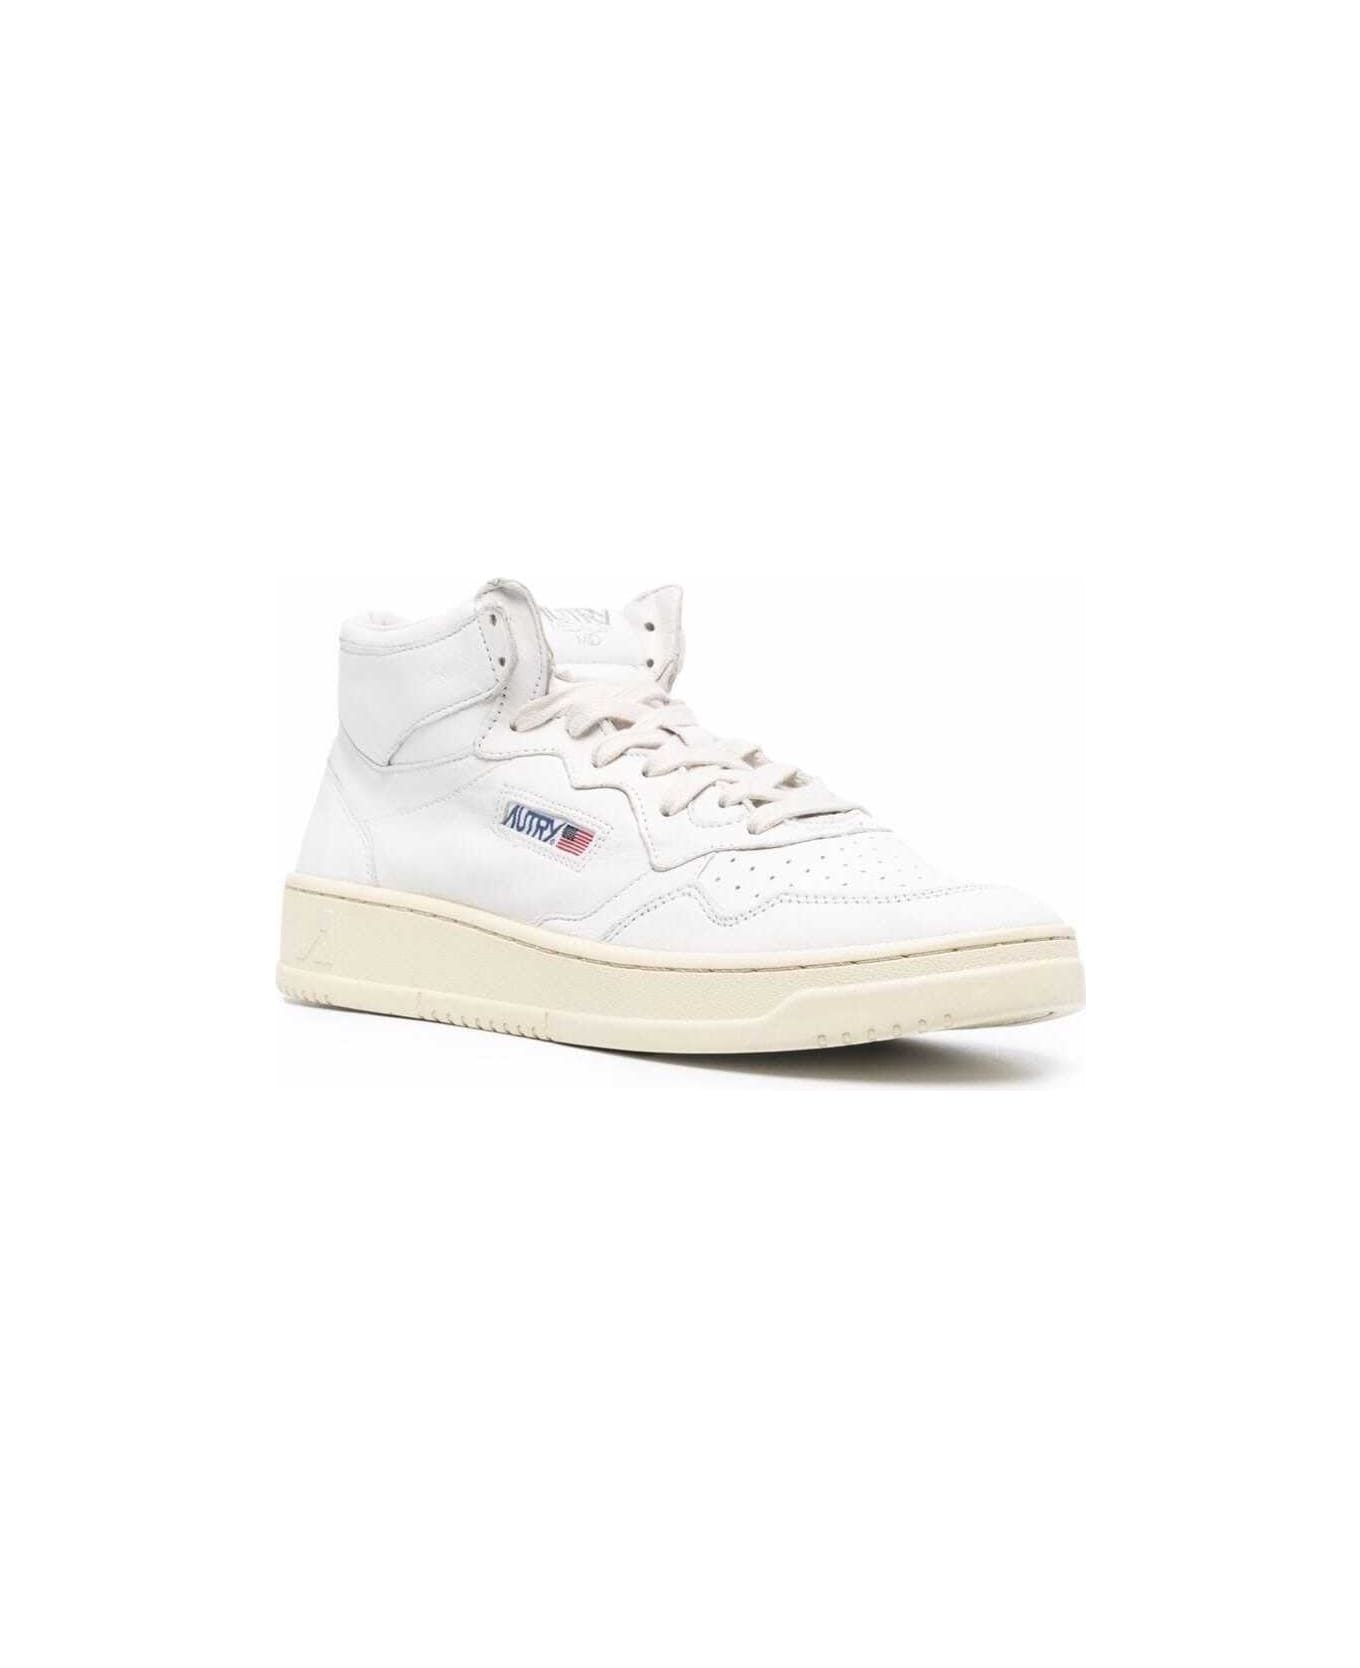 Autry Hig Top White Leather Sneakers With Logo Autry Man - White スニーカー